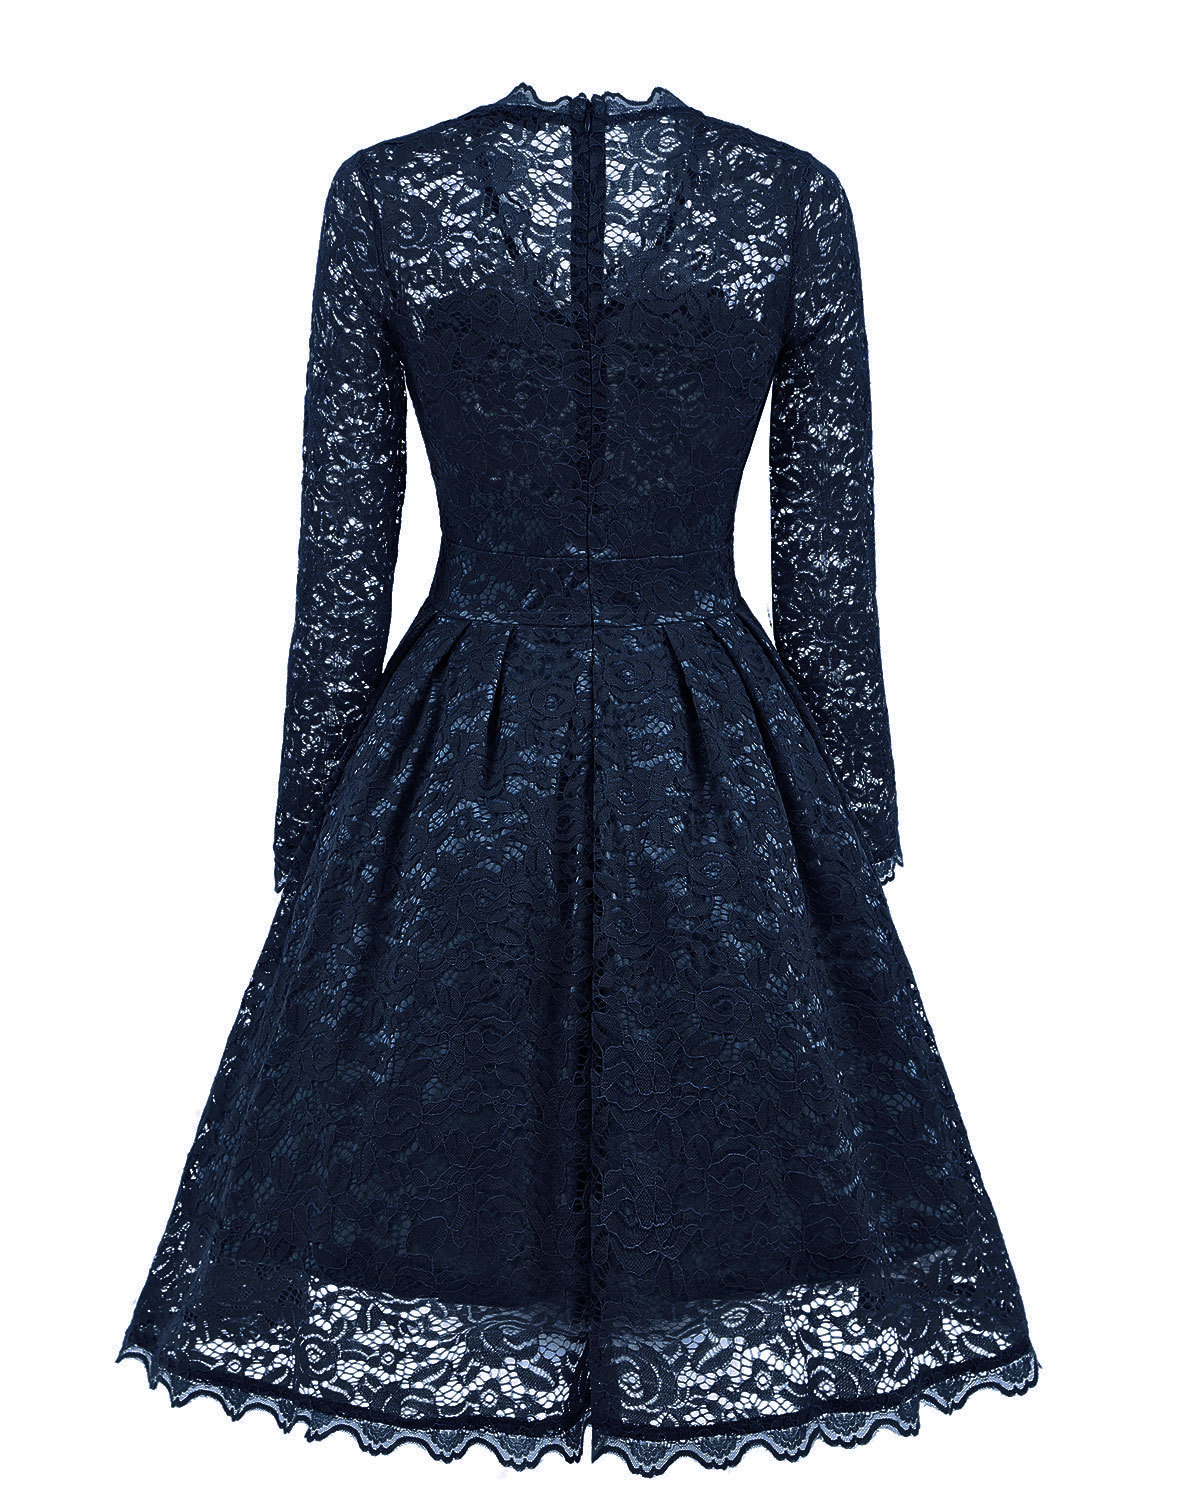 F2528-1 Retro Floral Lace Long Sleeve Vintage Swing Cocktail Bridesmaid Dress